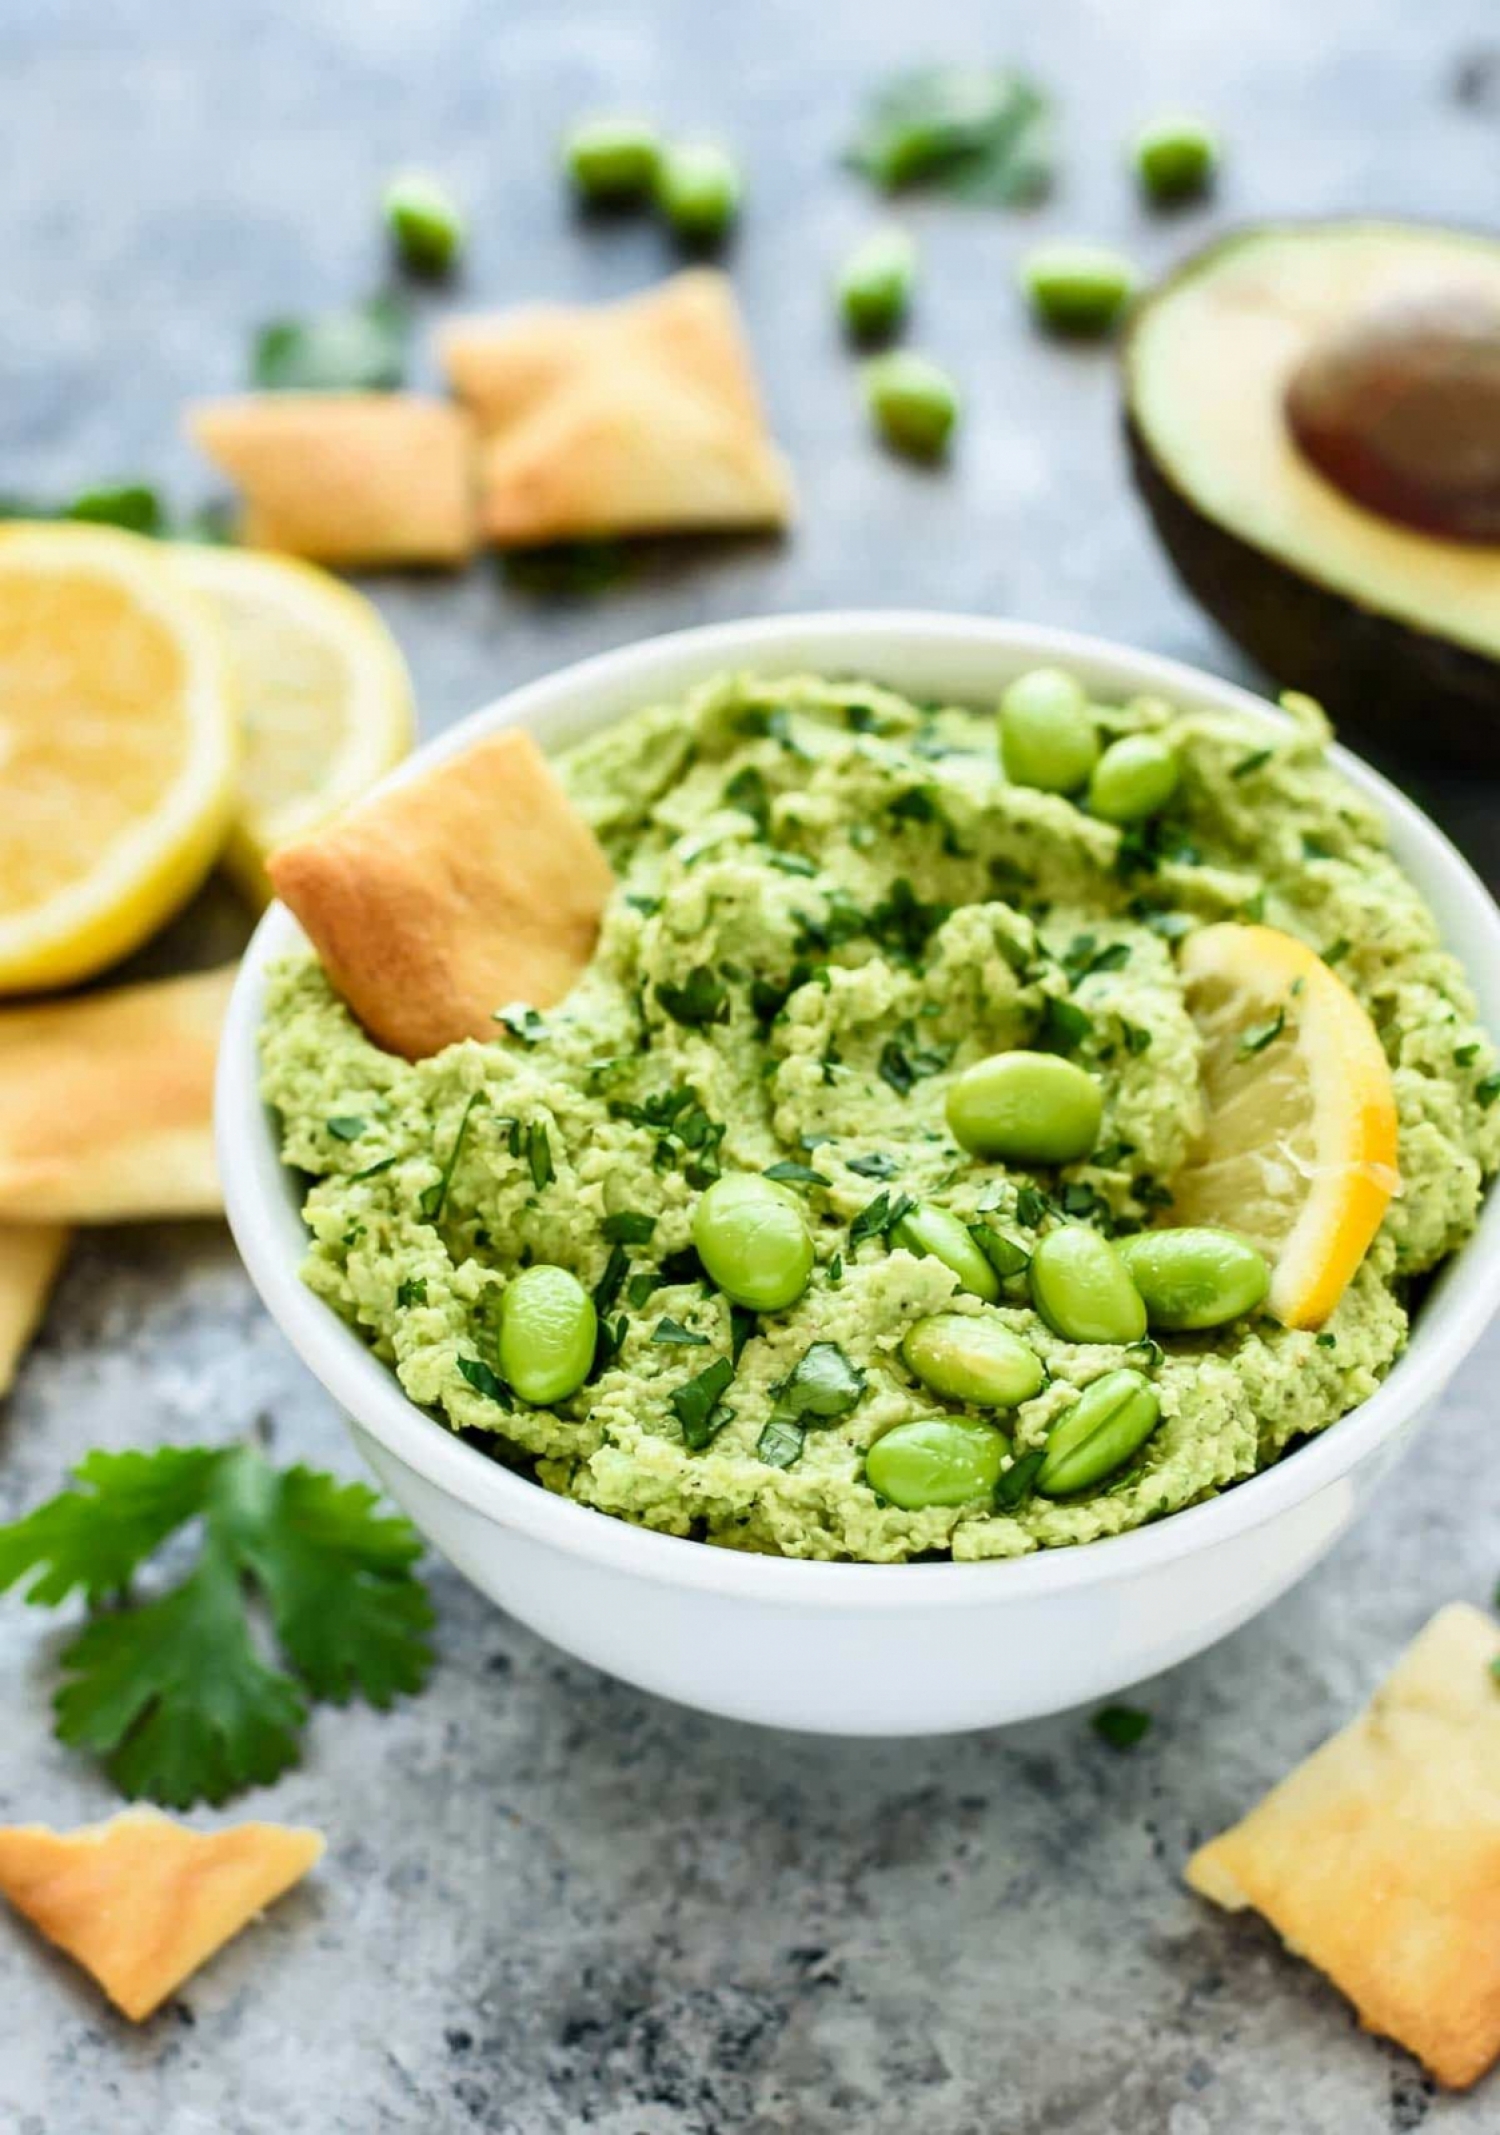 <p>Take a break from traditional chickpea hummus with this vibrant green dip made with shelled edamame, fresh cilantro and avocado. Full of satiating good-for-you fats and fiber, it's a great alternative snack to try when you're bored of the same old, same old. <a href="https://www.wellplated.com/avocado-hummus/" rel="noopener">Get the recipe here.</a></p>